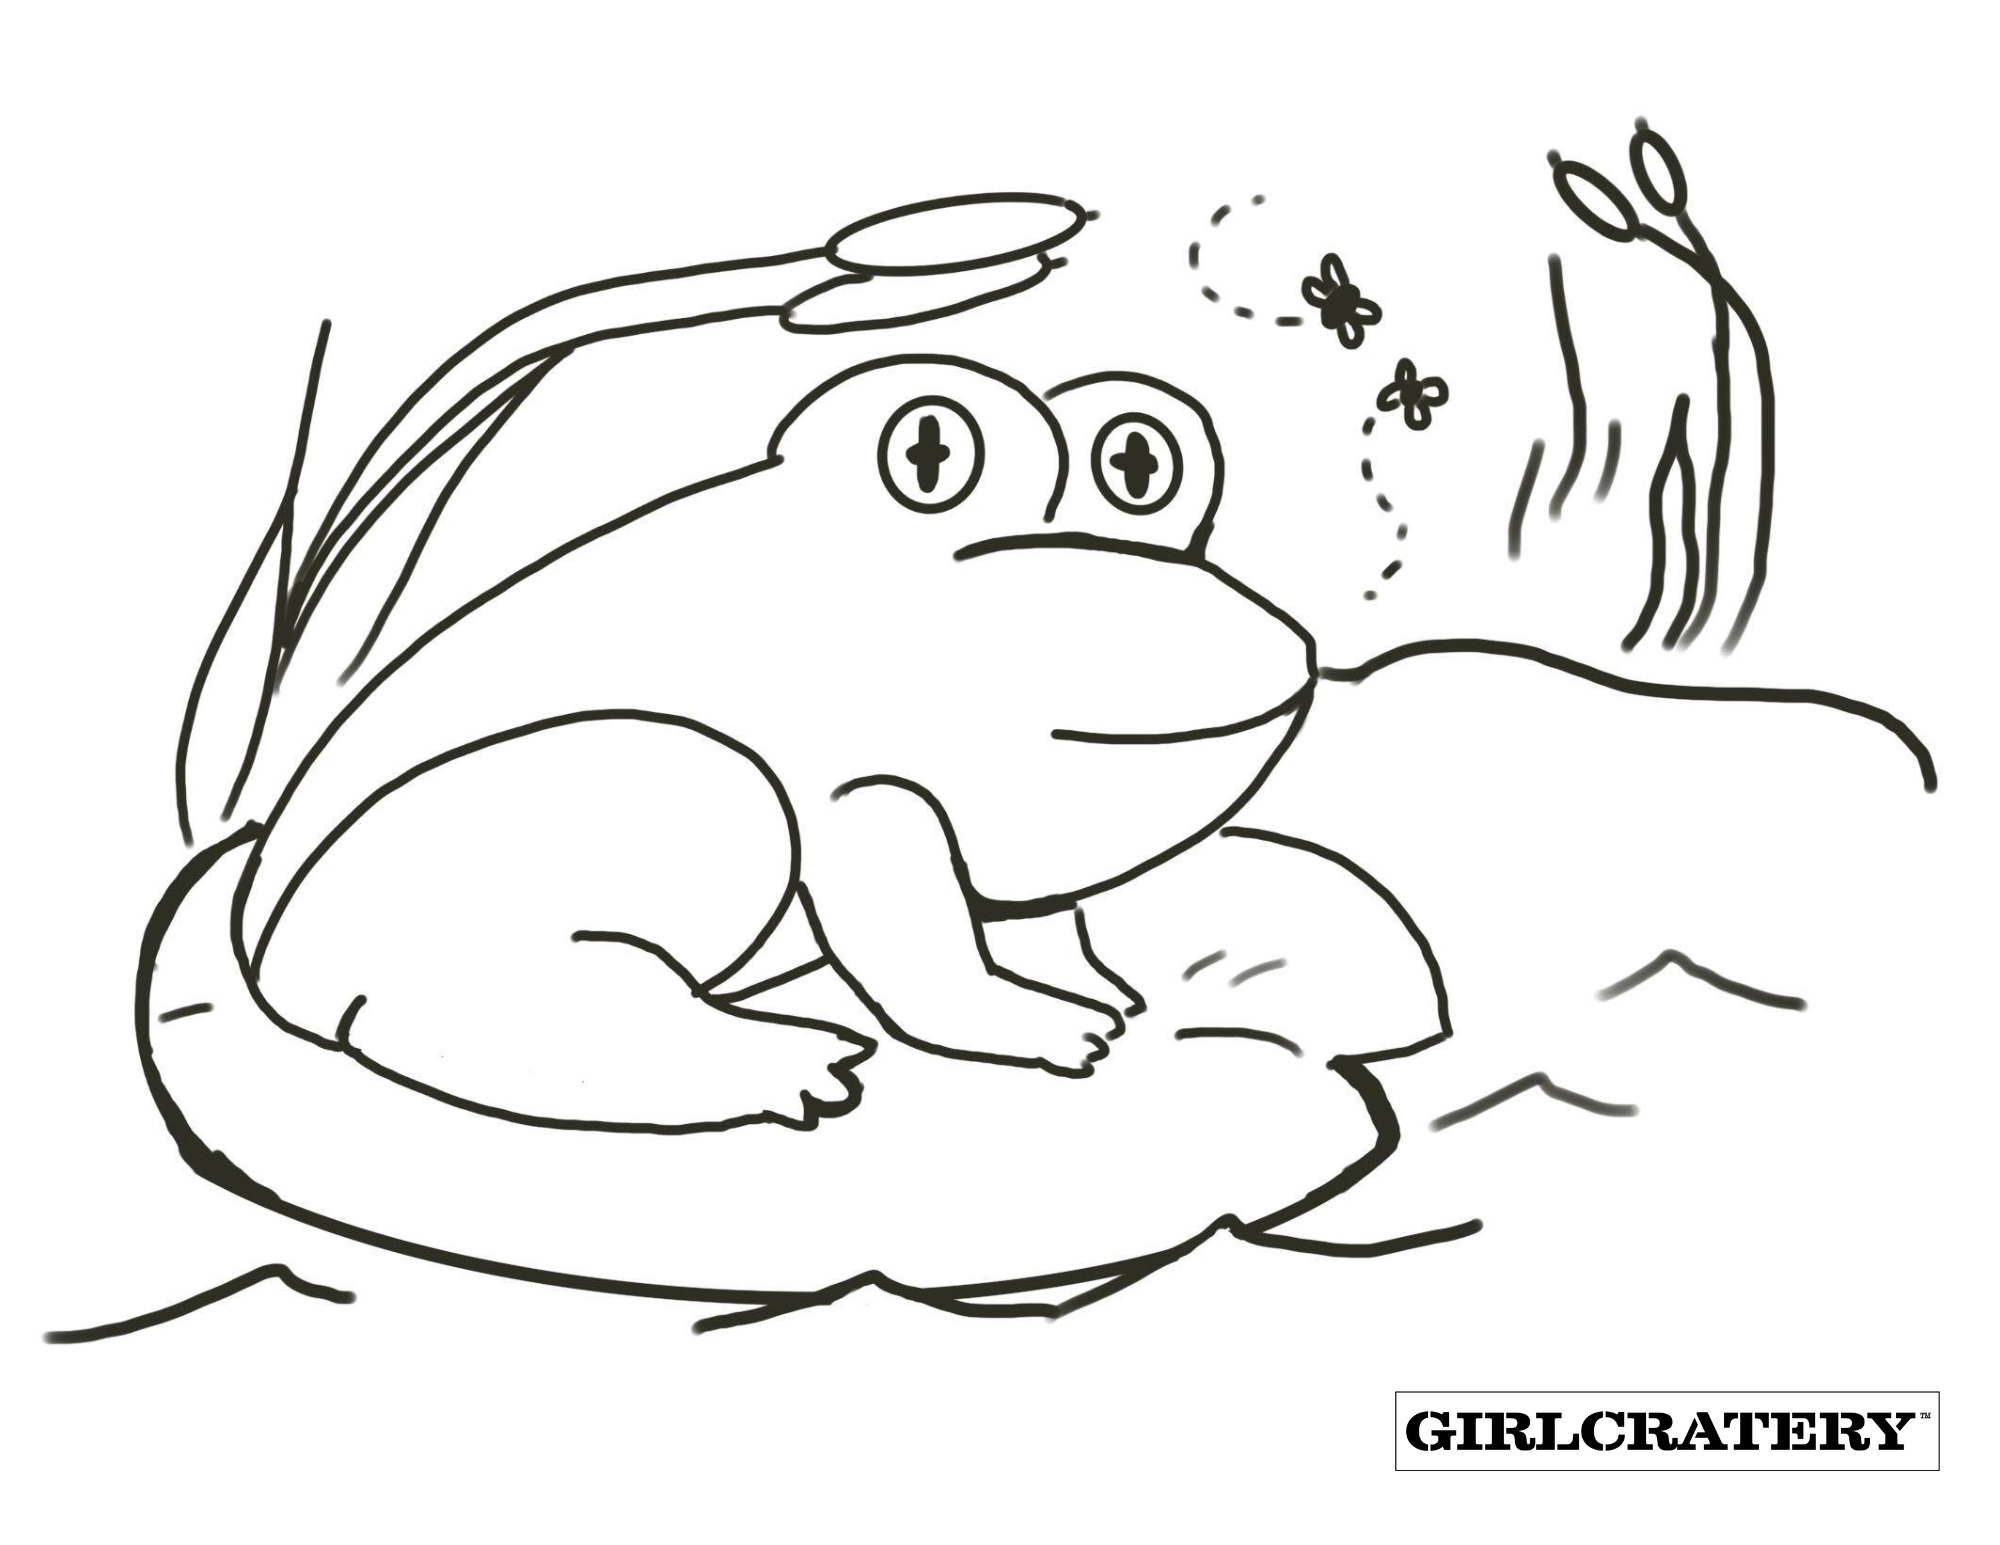 Frog Coloring Page – GirlCratery